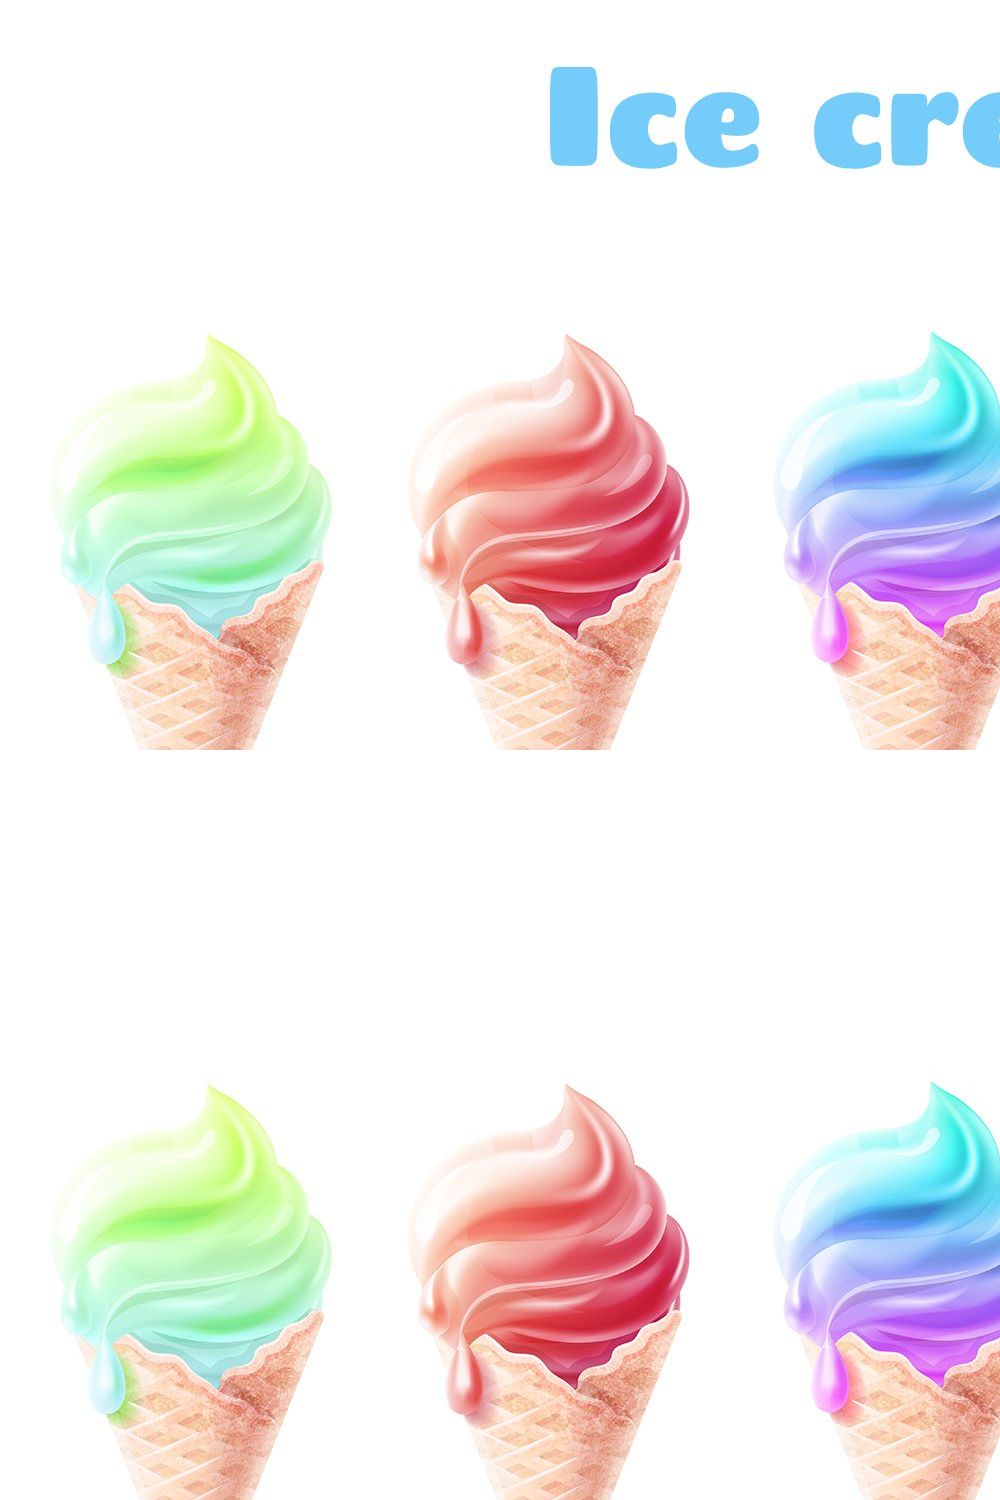 Ice cream set, realistic style pinterest preview image.